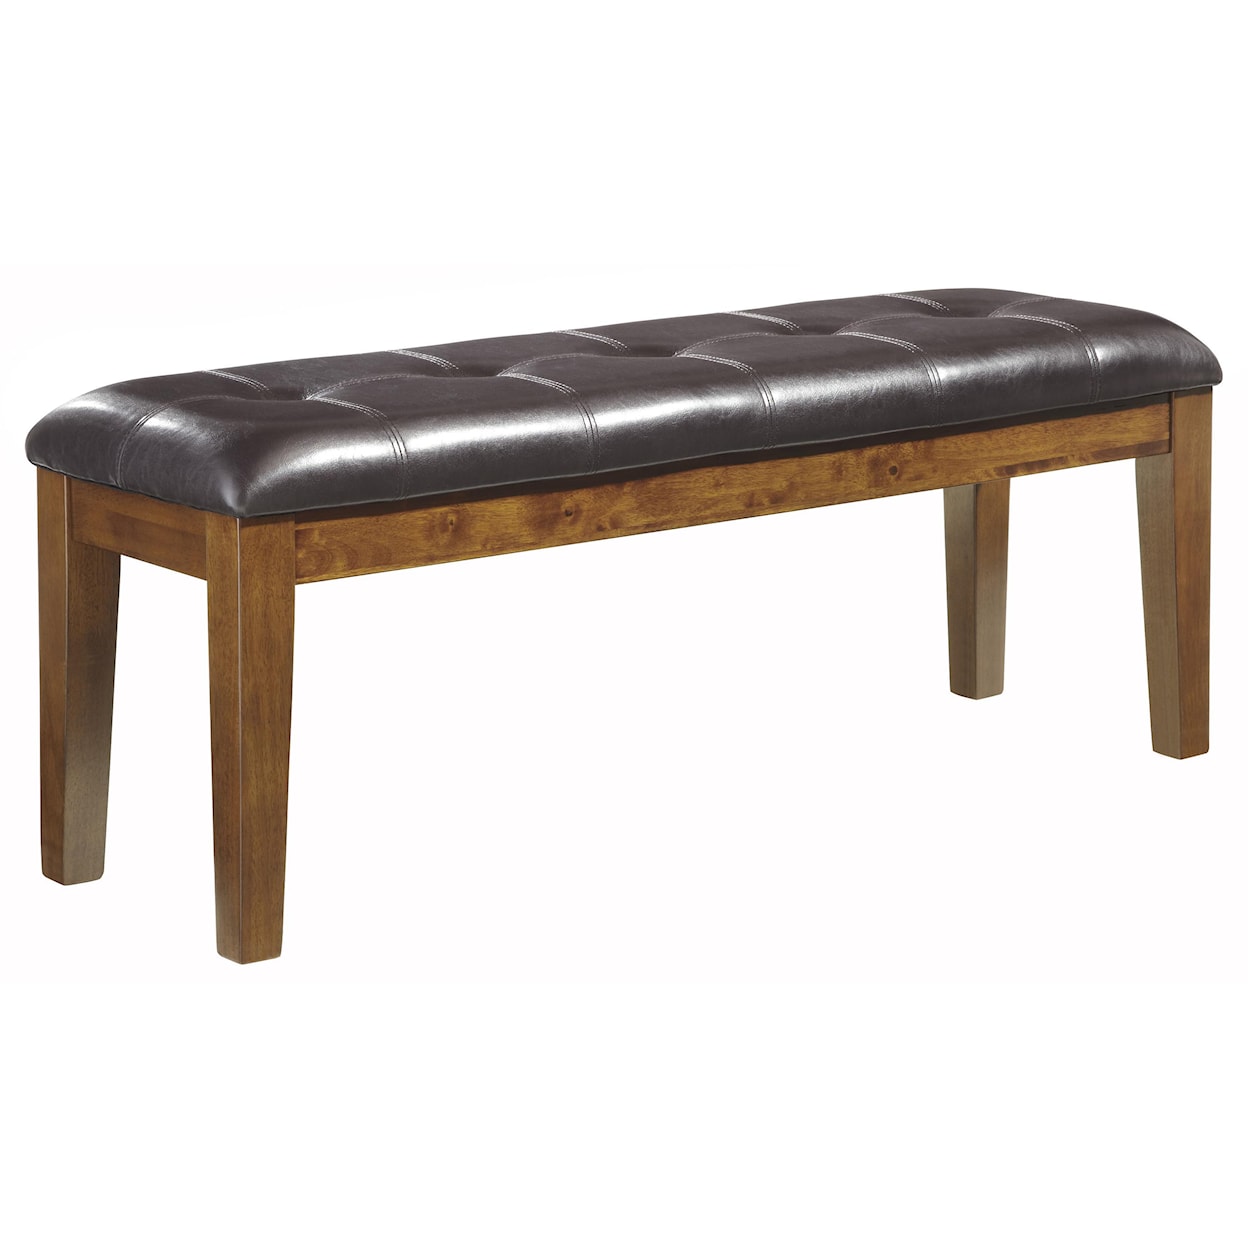 Signature Design by Ashley Ralene Large UPH Dining Room Bench